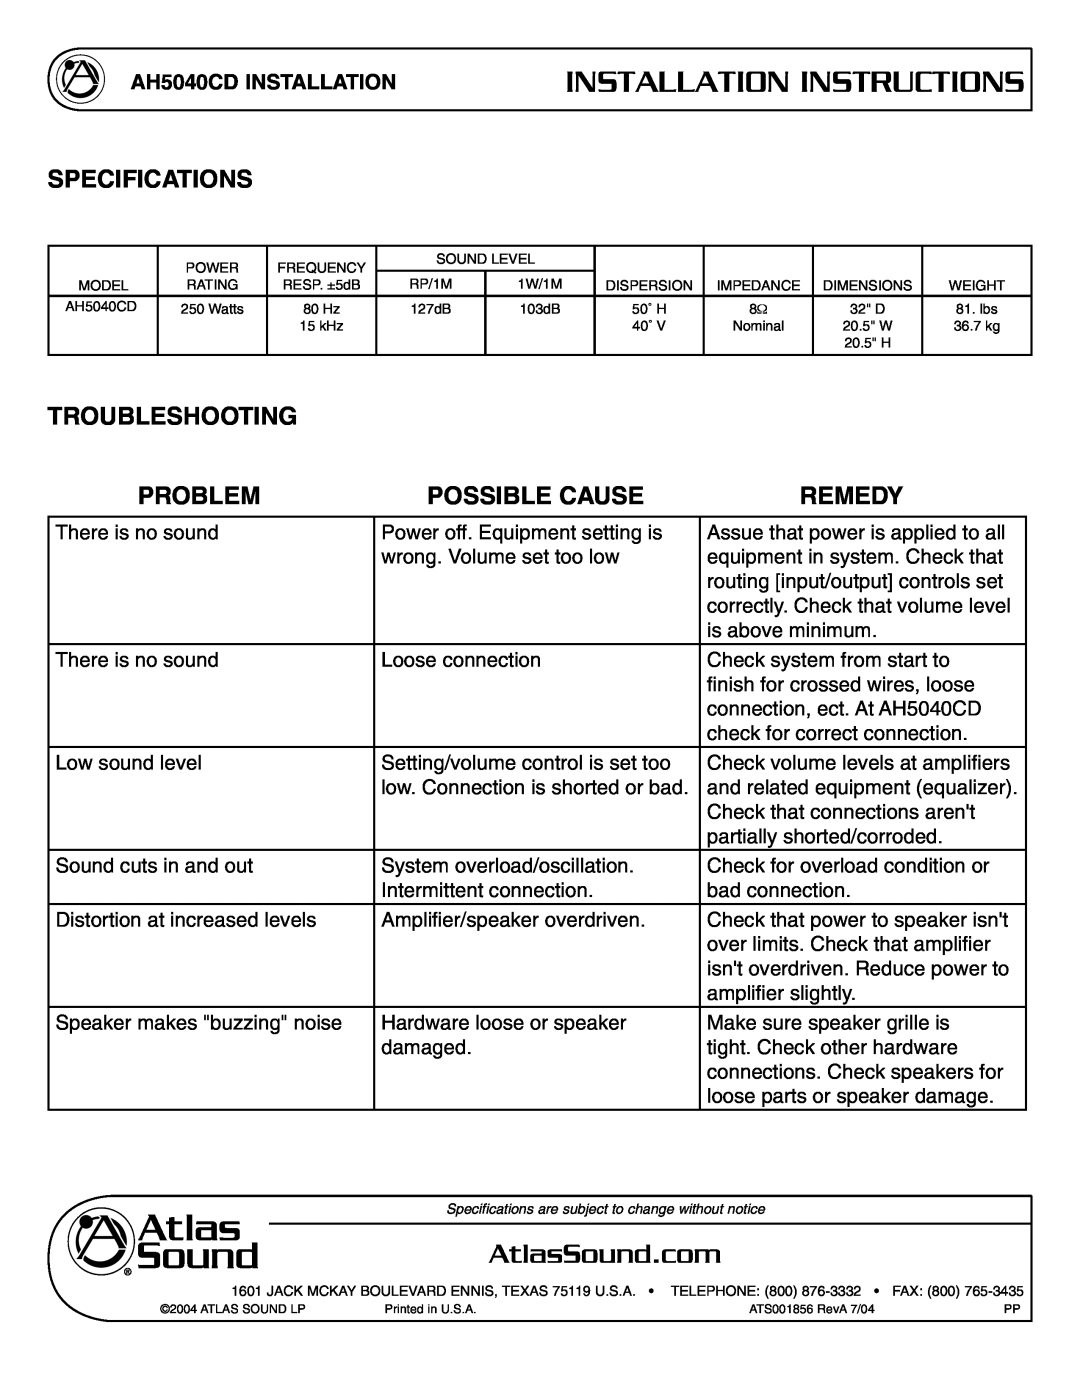 Atlas Sound AH5040CD Specifications, Troubleshooting, Problem, Possible Cause, Remedy, Installation Instructions 